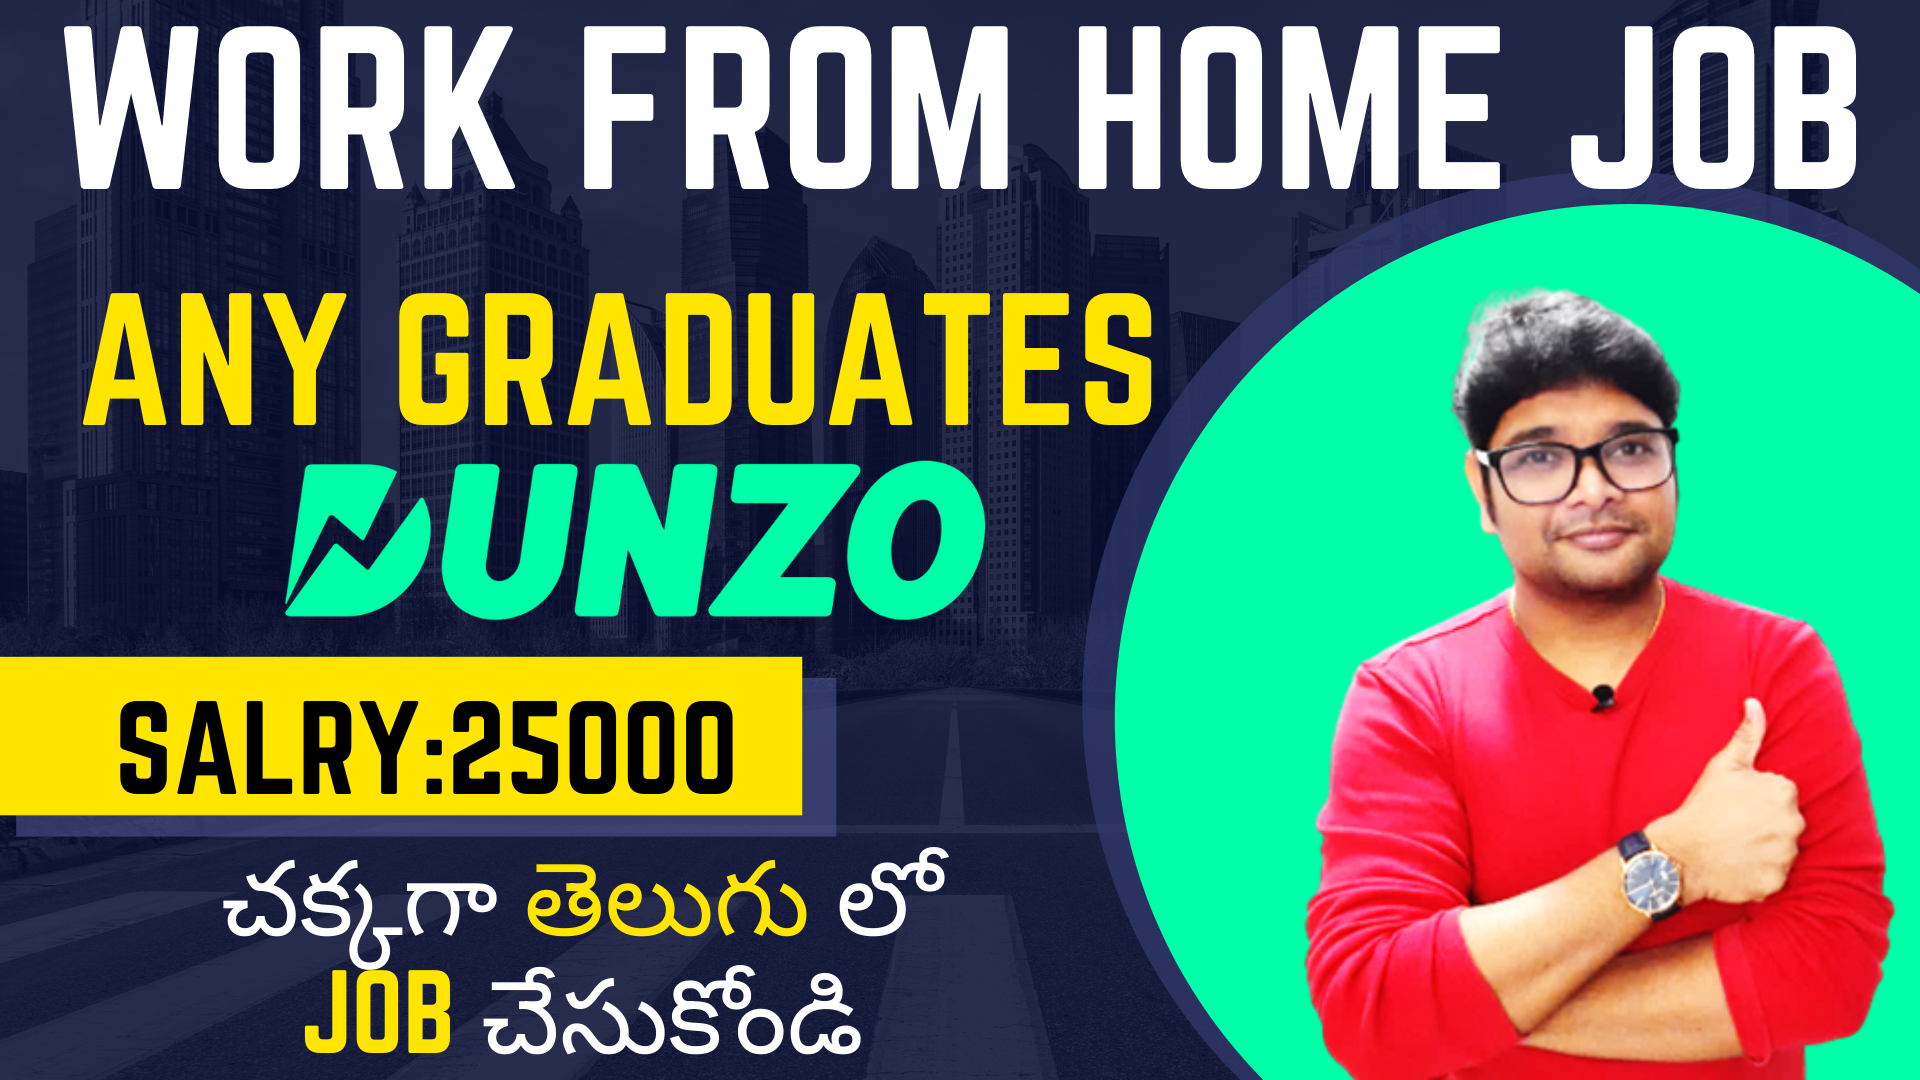 Dunzo Work from Home job Work from Home jobs in Telugu Dunzo jobs Latest jobs V the Techee